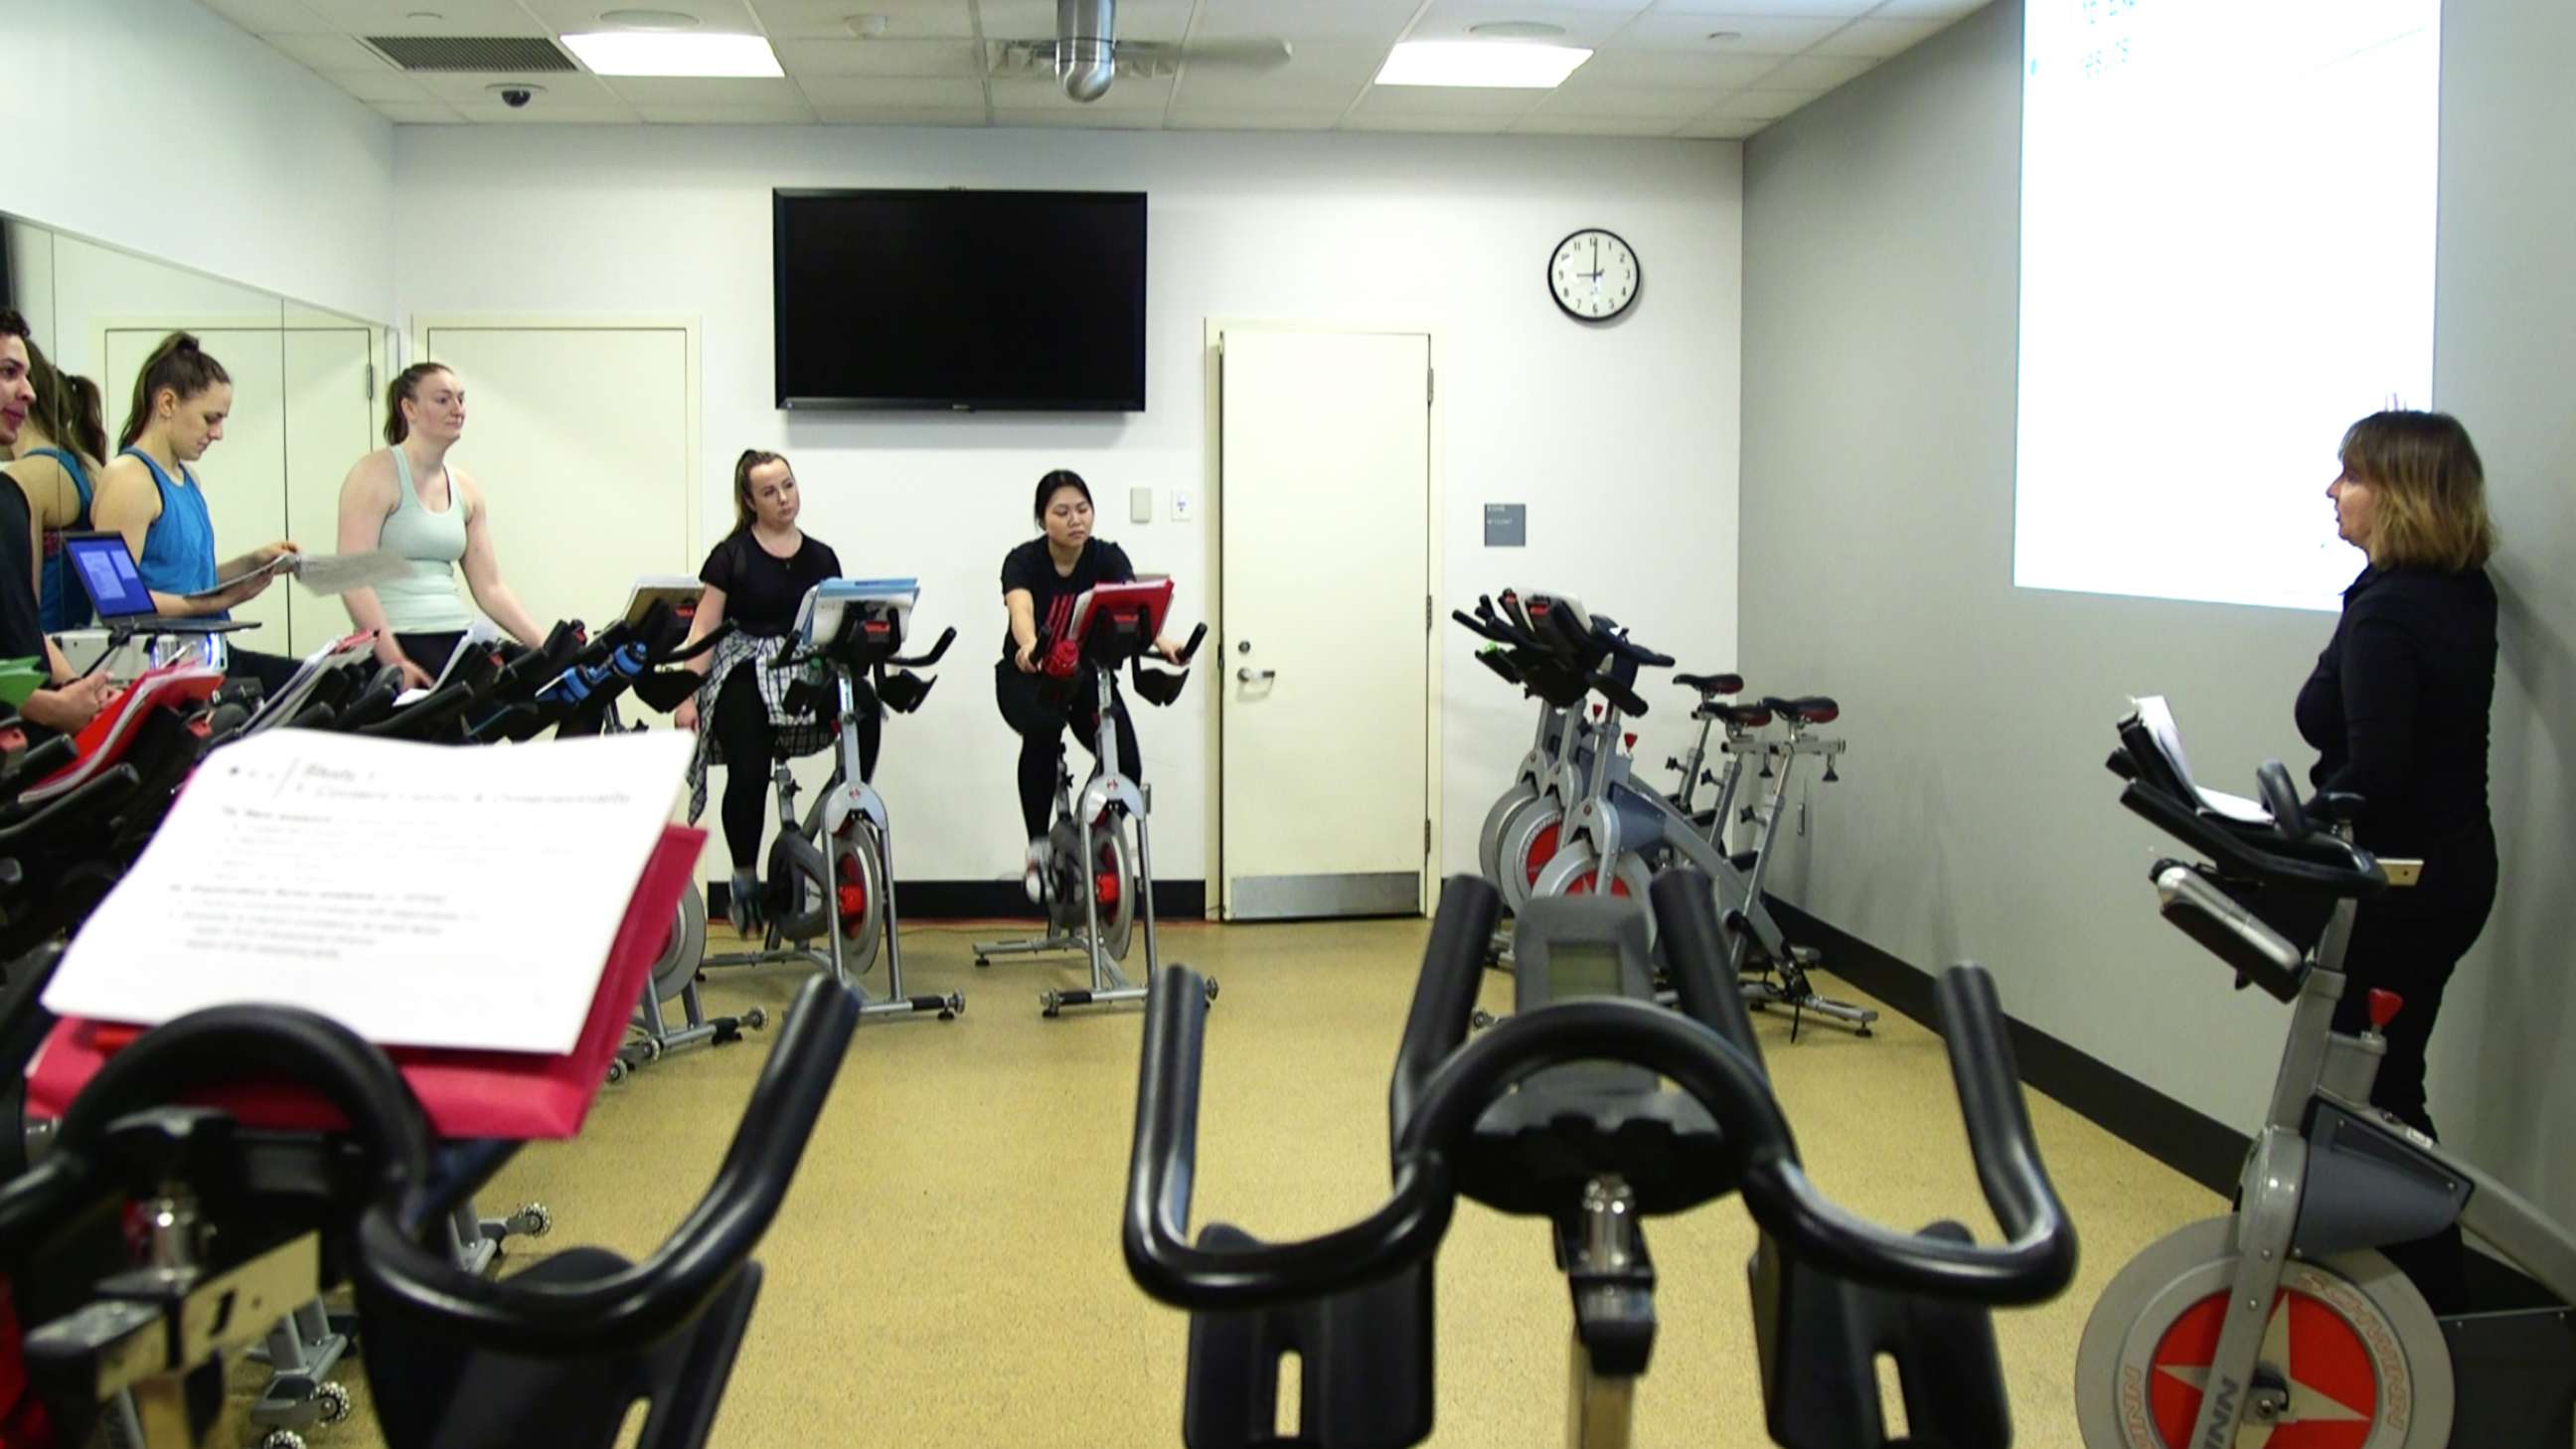 PHOTO: Fordham University professor Julita Haber teaches a business course while students are on spin bikes.